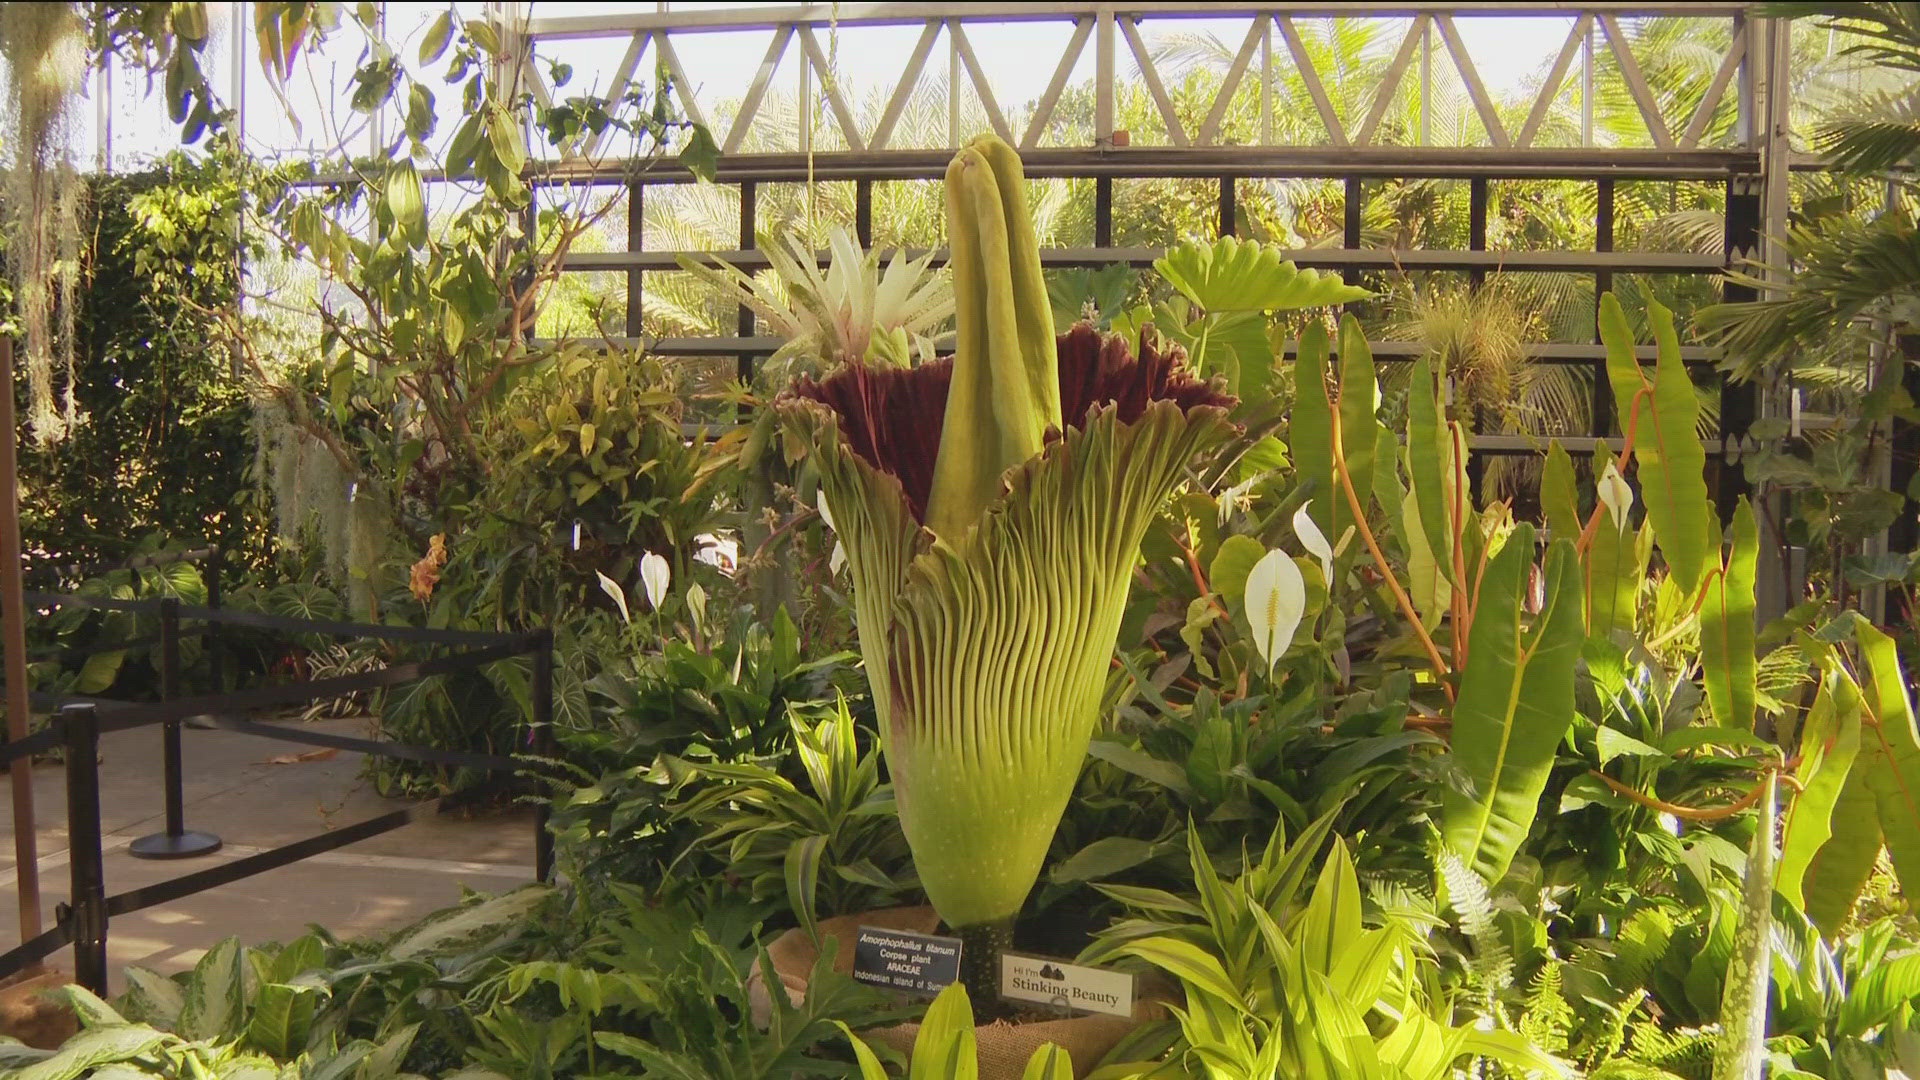 A corpse flower is blooming at the San Diego Botanic Garden, the plant blooms infrequently every couple years.